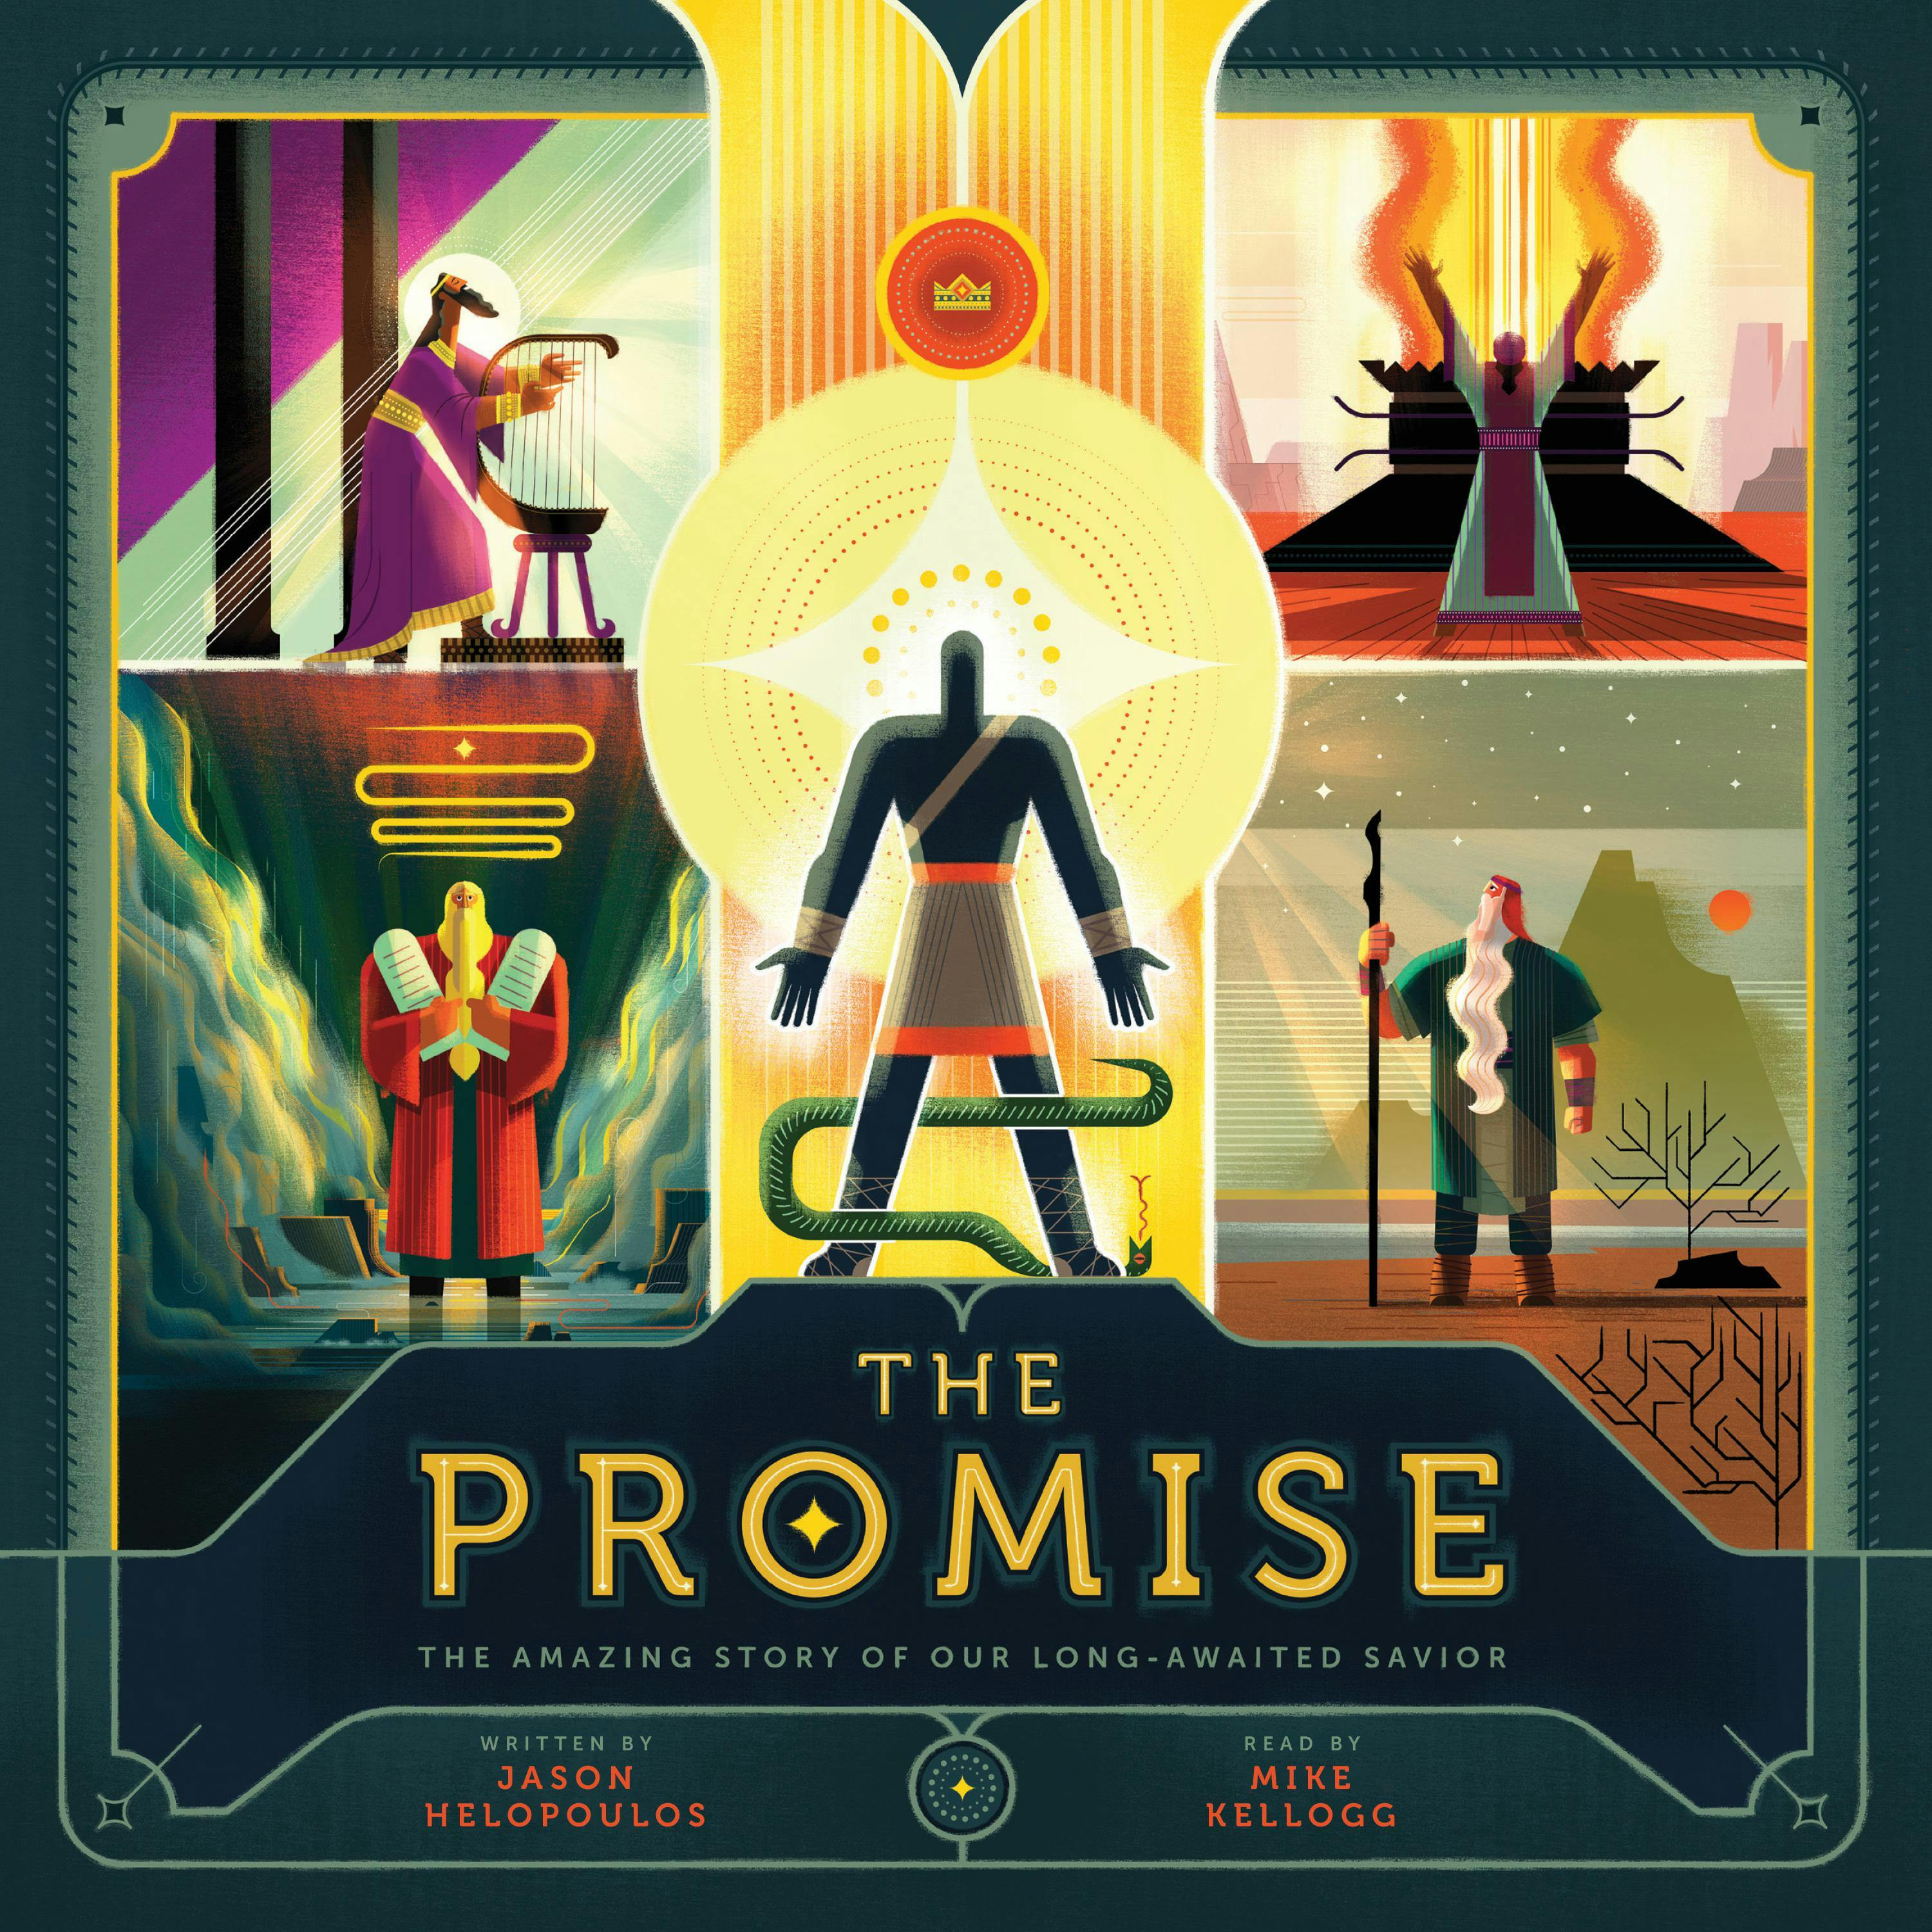 The Promise: The Amazing Story of Our Long-Awaited Savior - Jason Helopoulos